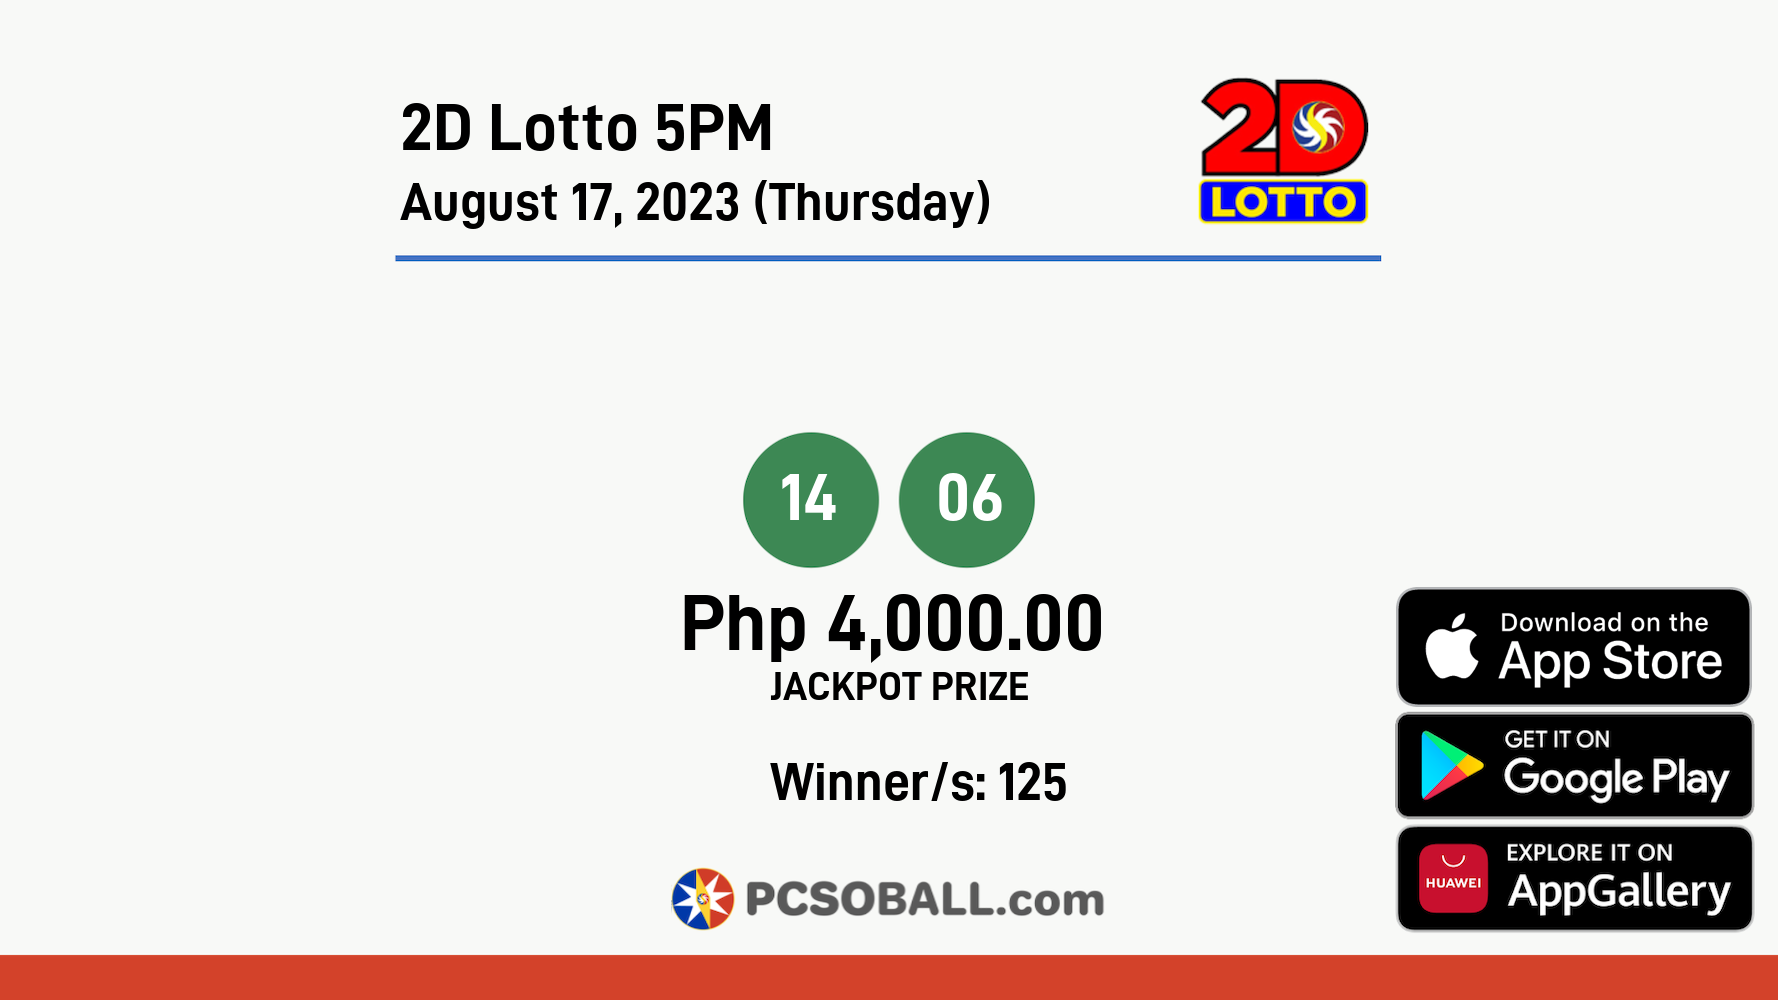 2D Lotto 5PM August 17, 2023 (Thursday) Result